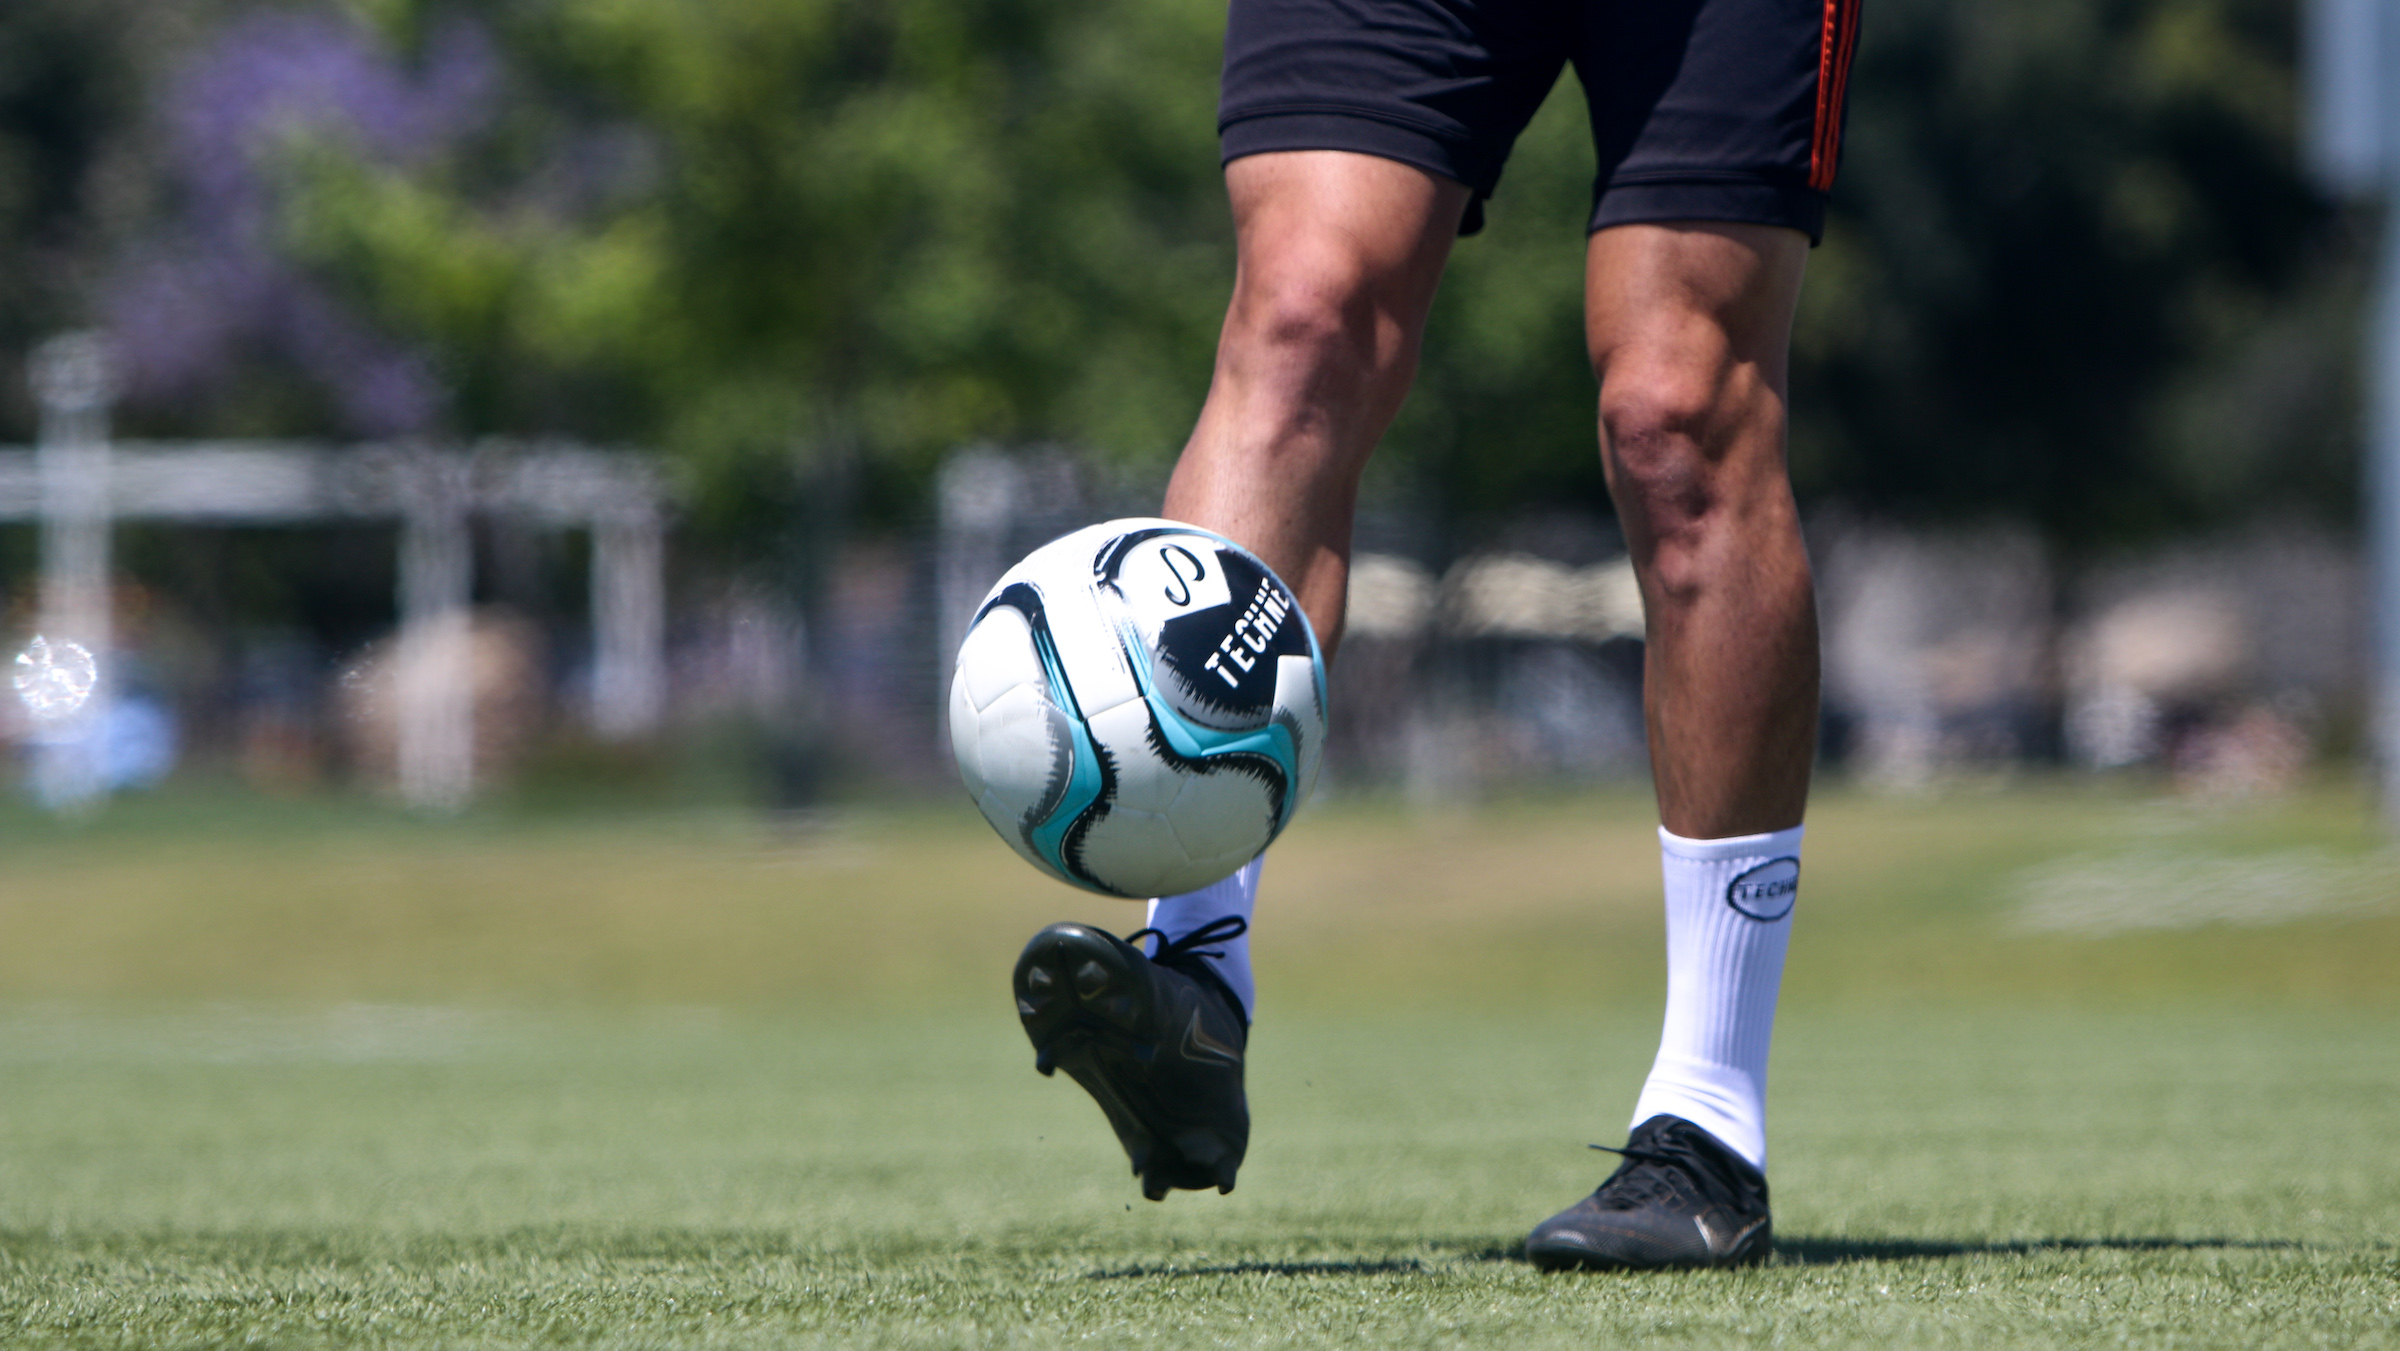 Do soccer players wear protective cups? If not, should they wear them?